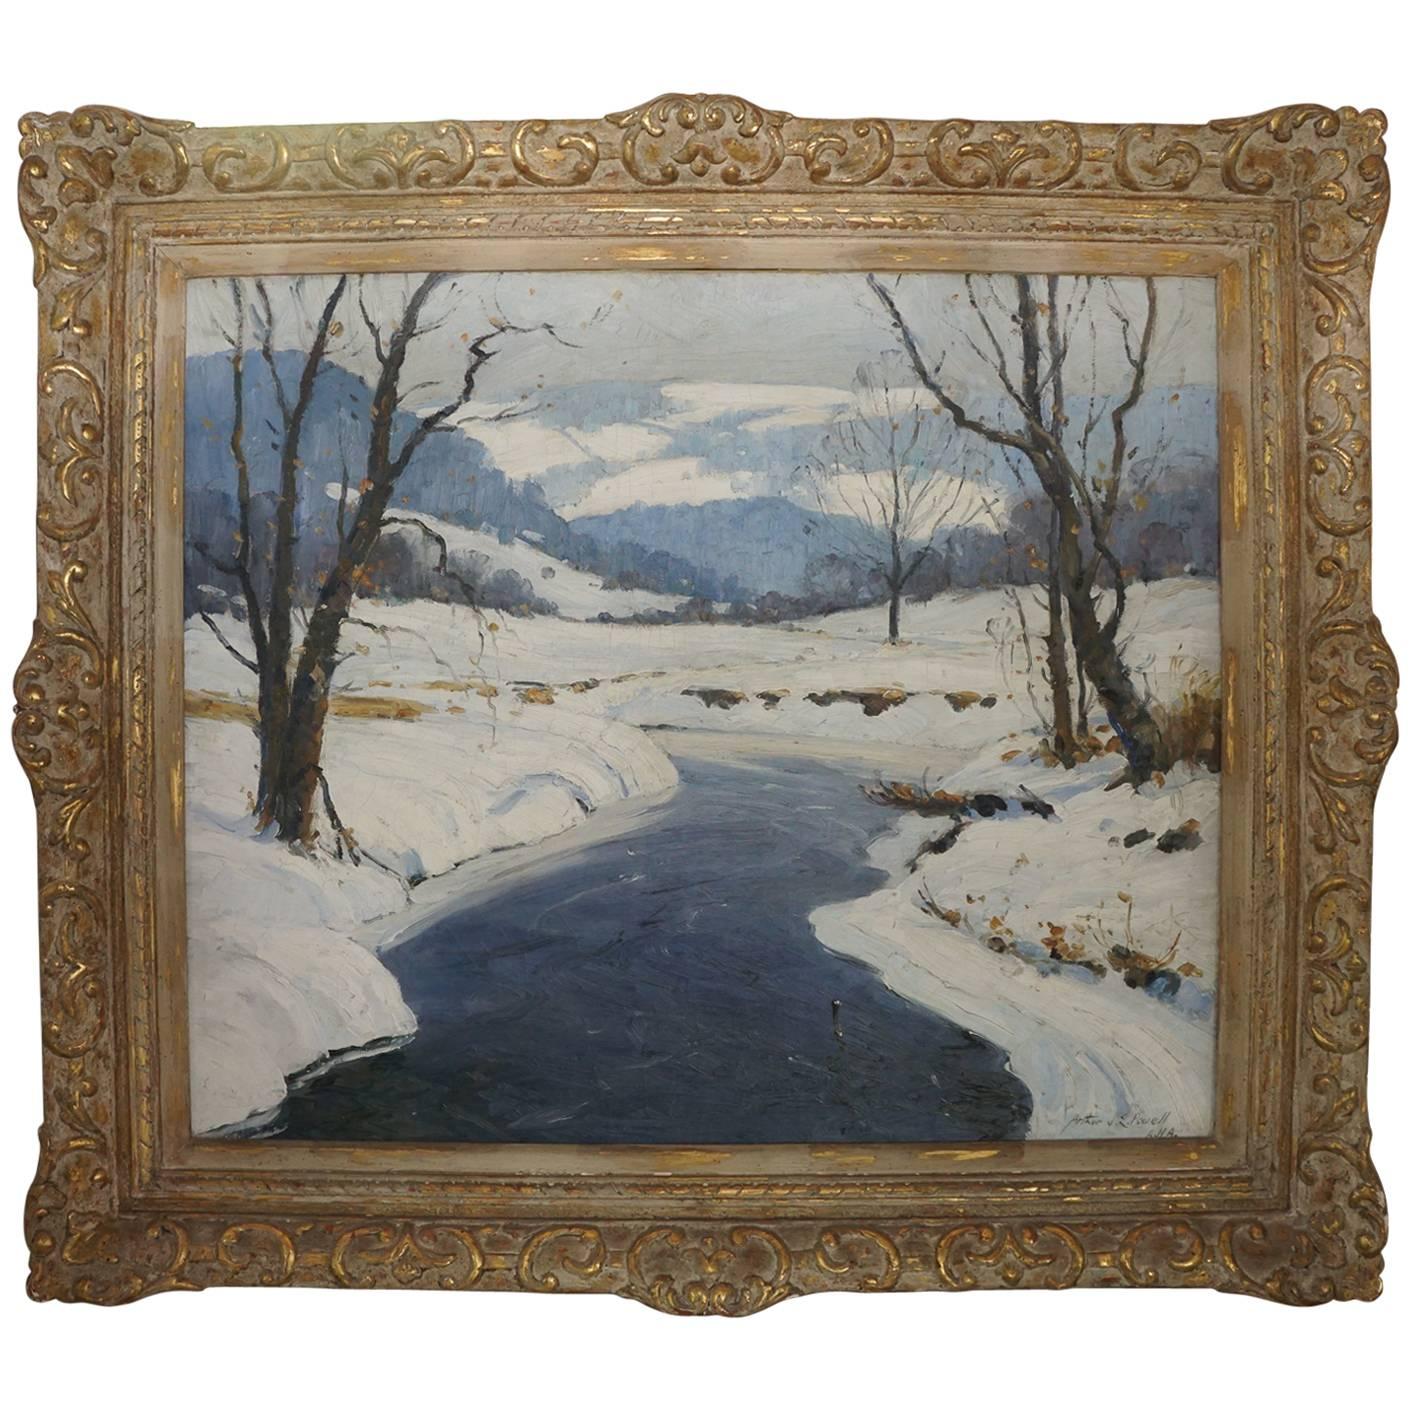 American Oil on Canvas, "Ten Mile River in the Snow" by Arthur J. E. Powell For Sale